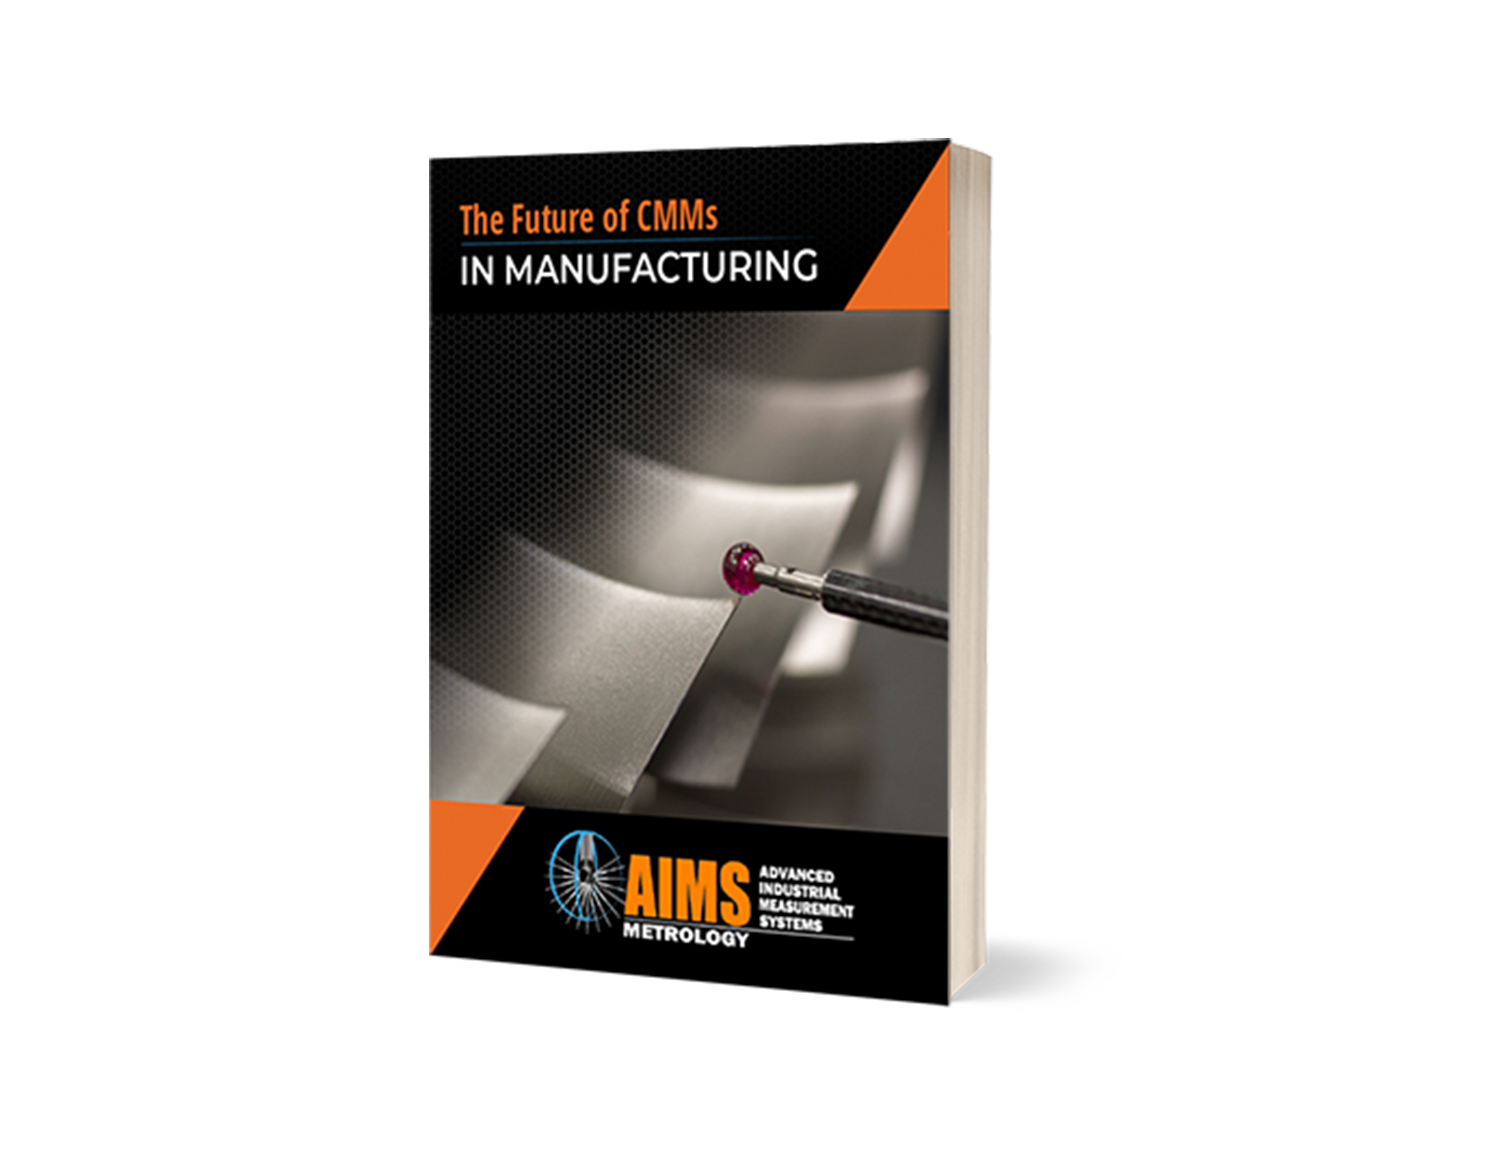 The Future of CMMs in Manufacturing